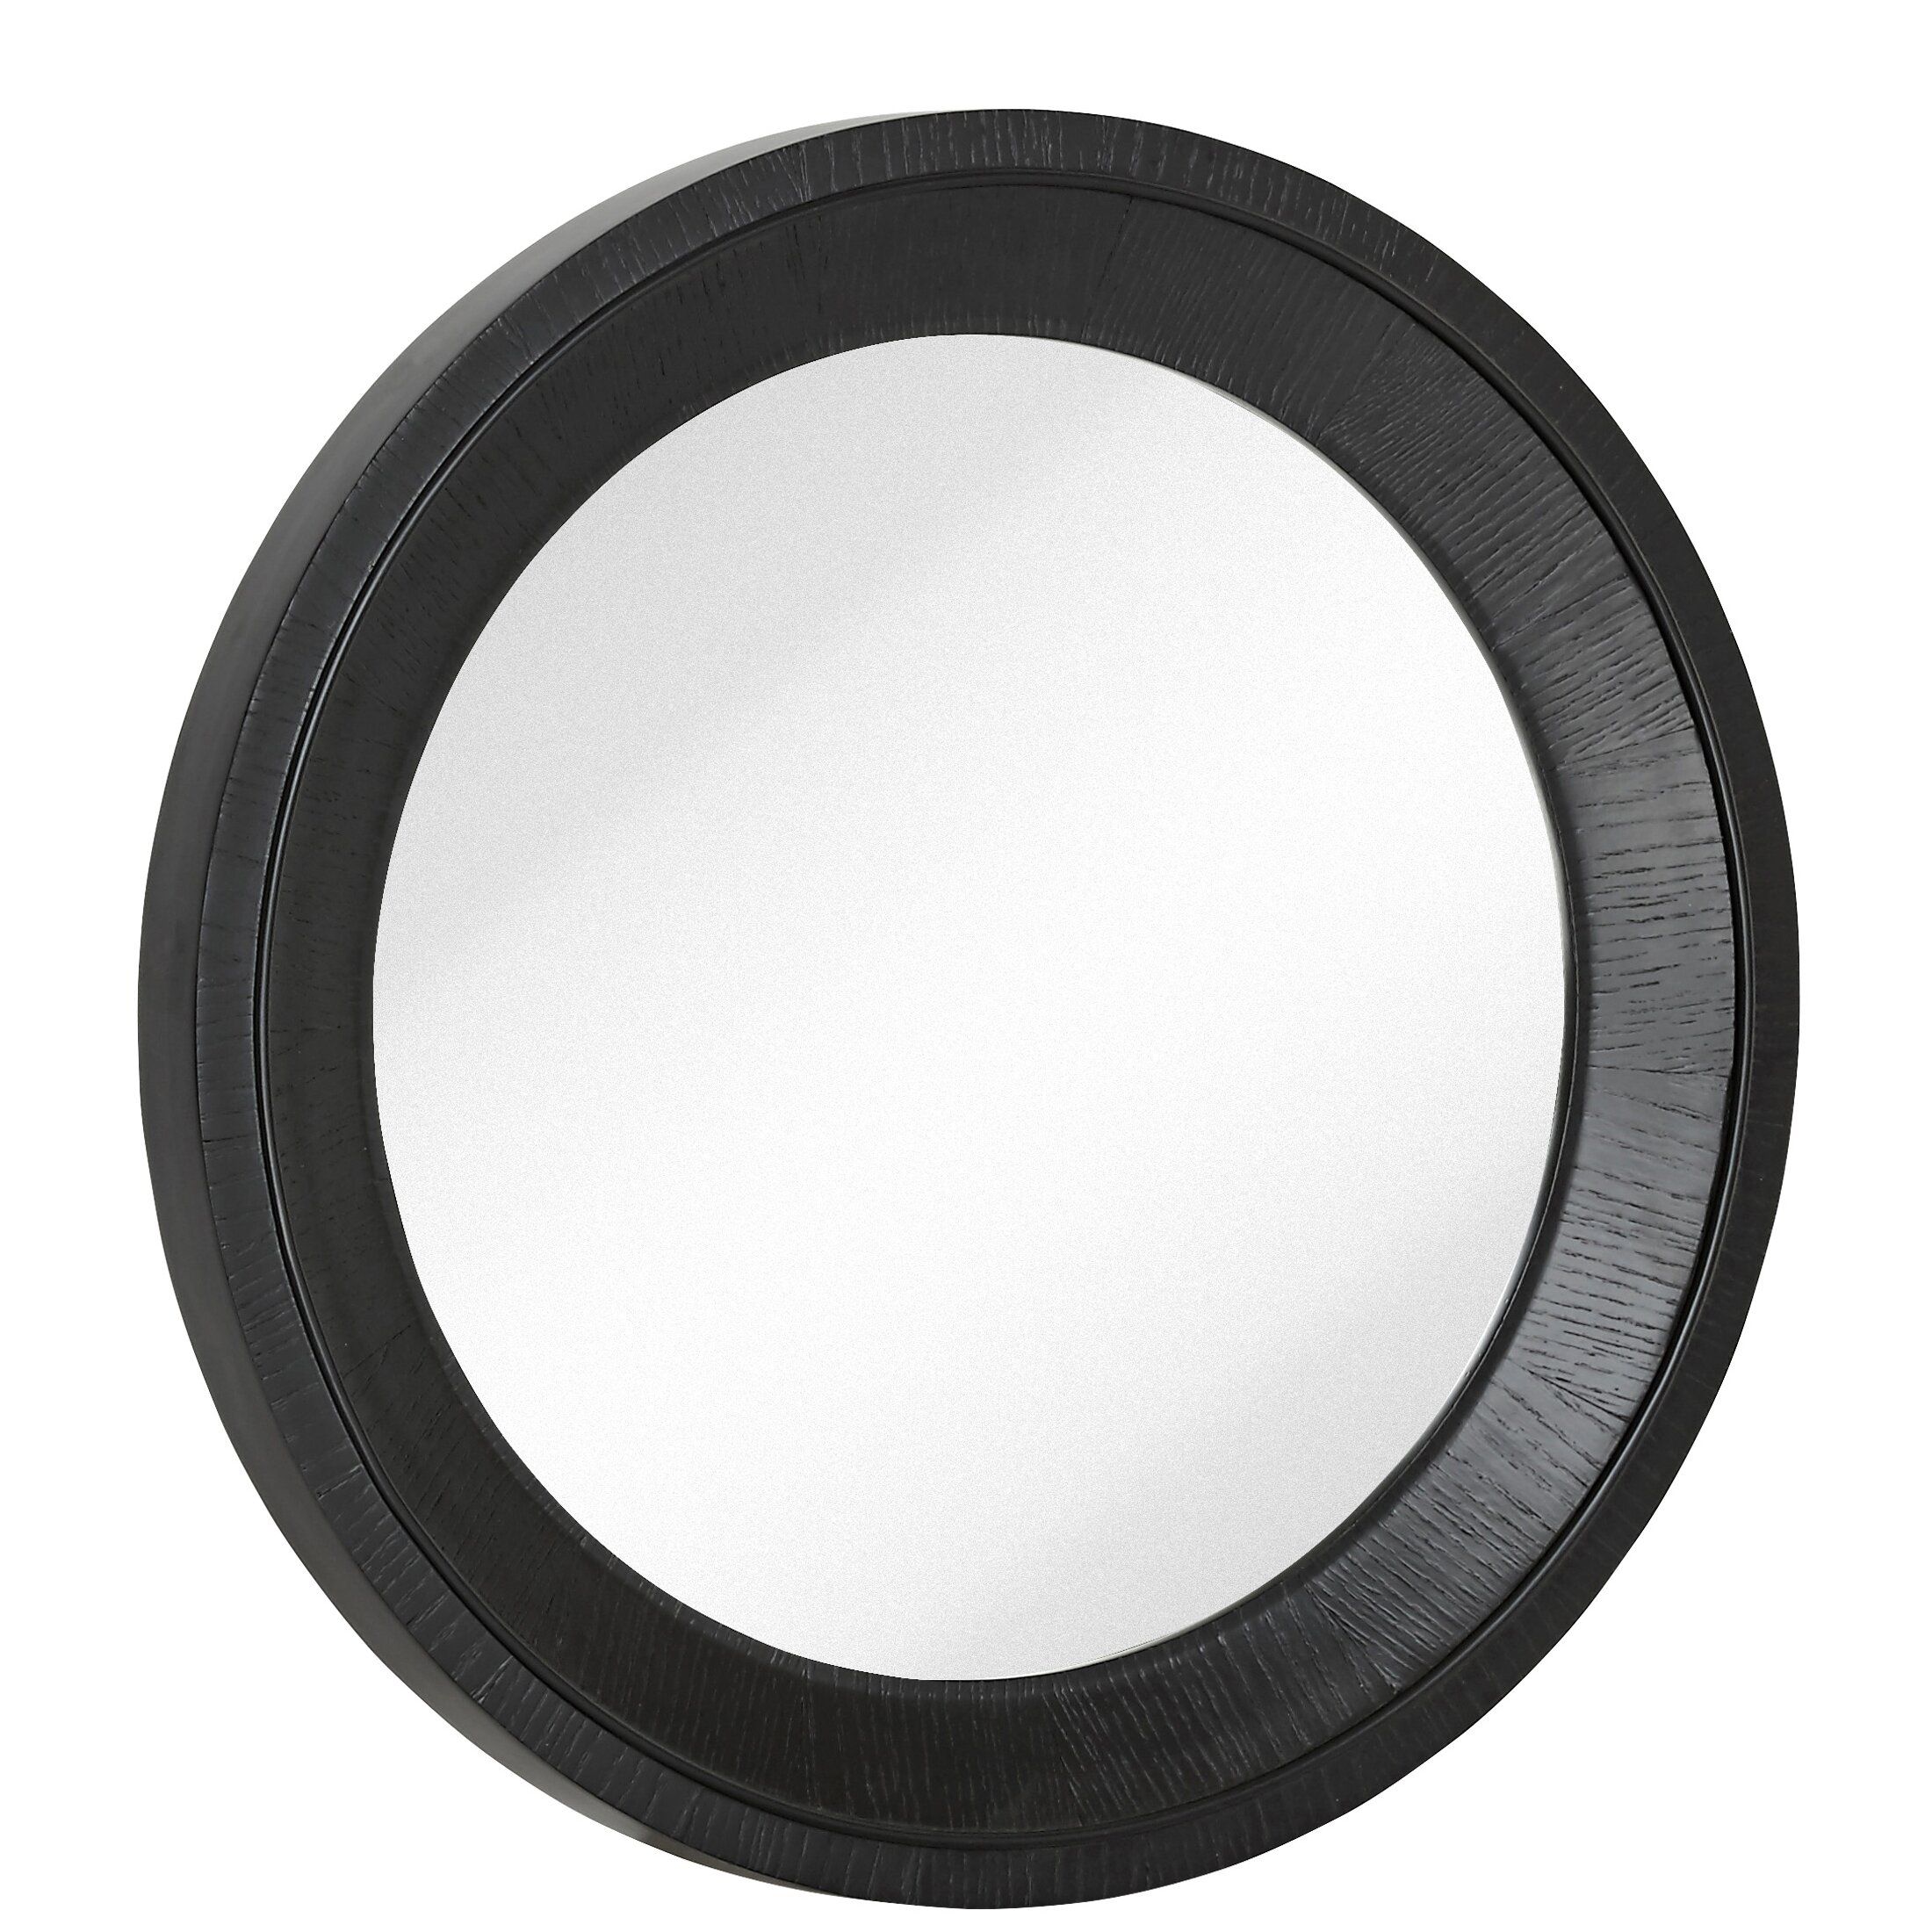 Majestic Mirror Round Black With Natural Wood Grain Circular Glass With Regard To Black Round Wall Mirrors (View 3 of 15)